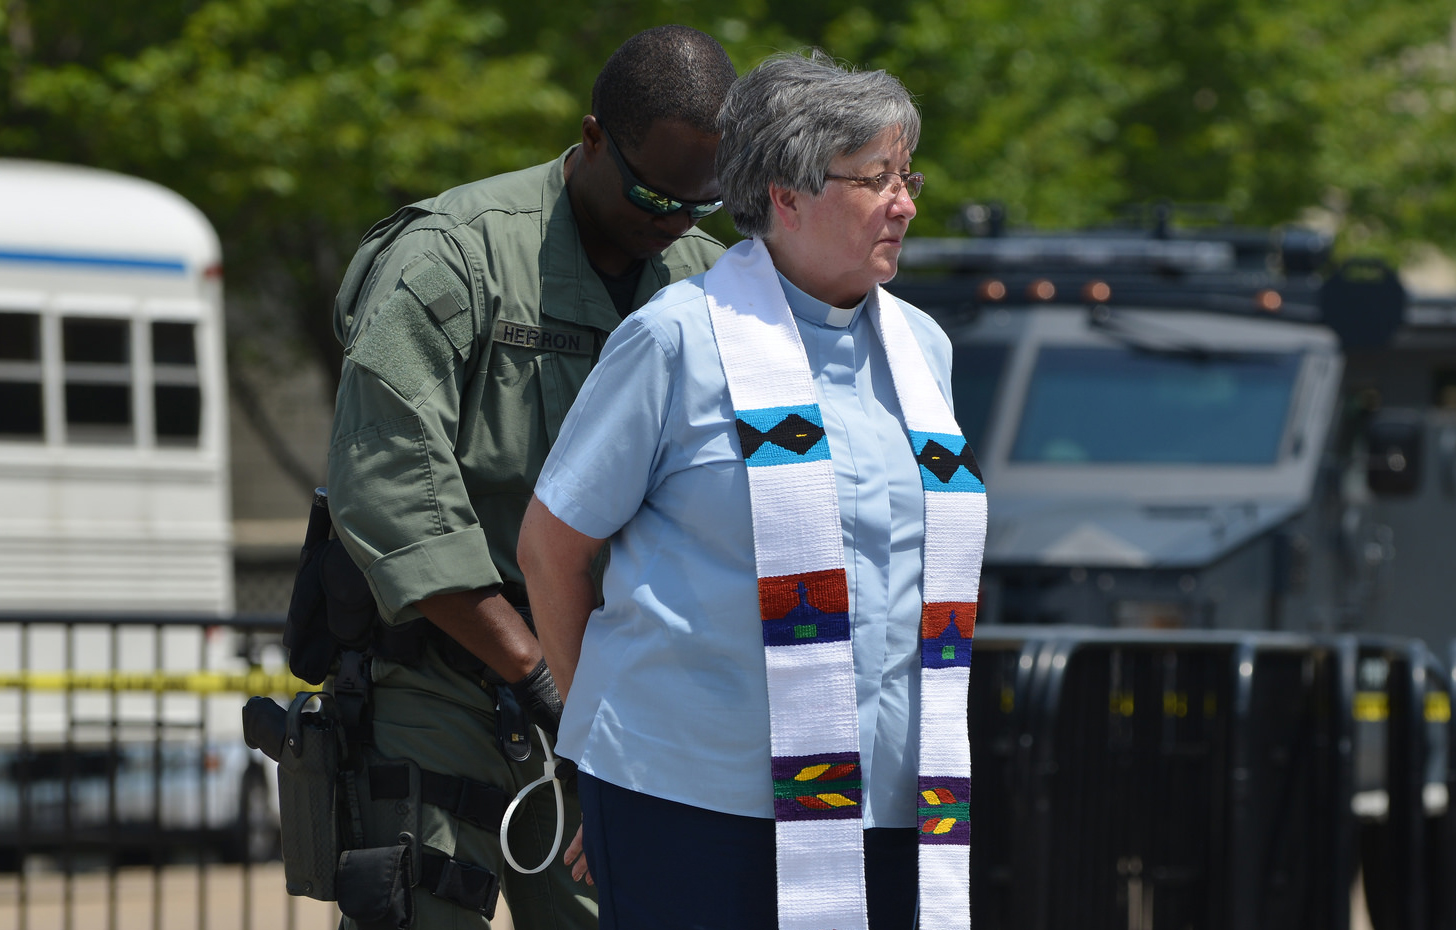 Over 100 Faith Leaders Arrested in Protest Against Record Deportations